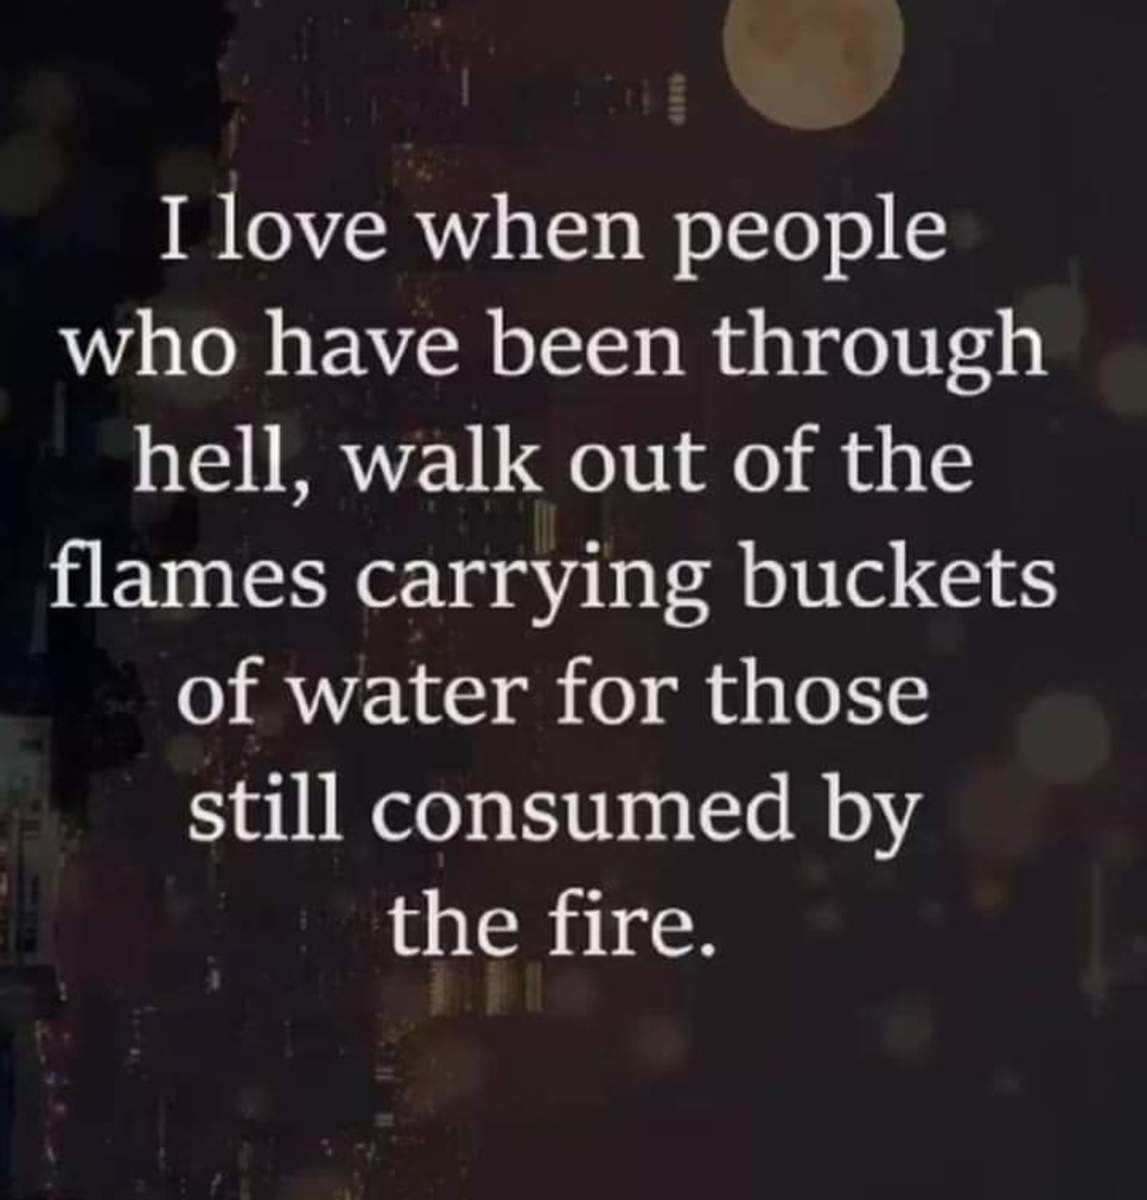 One of my favorite quotes, that reminds me to bring back buckets for those still caught in the flames.